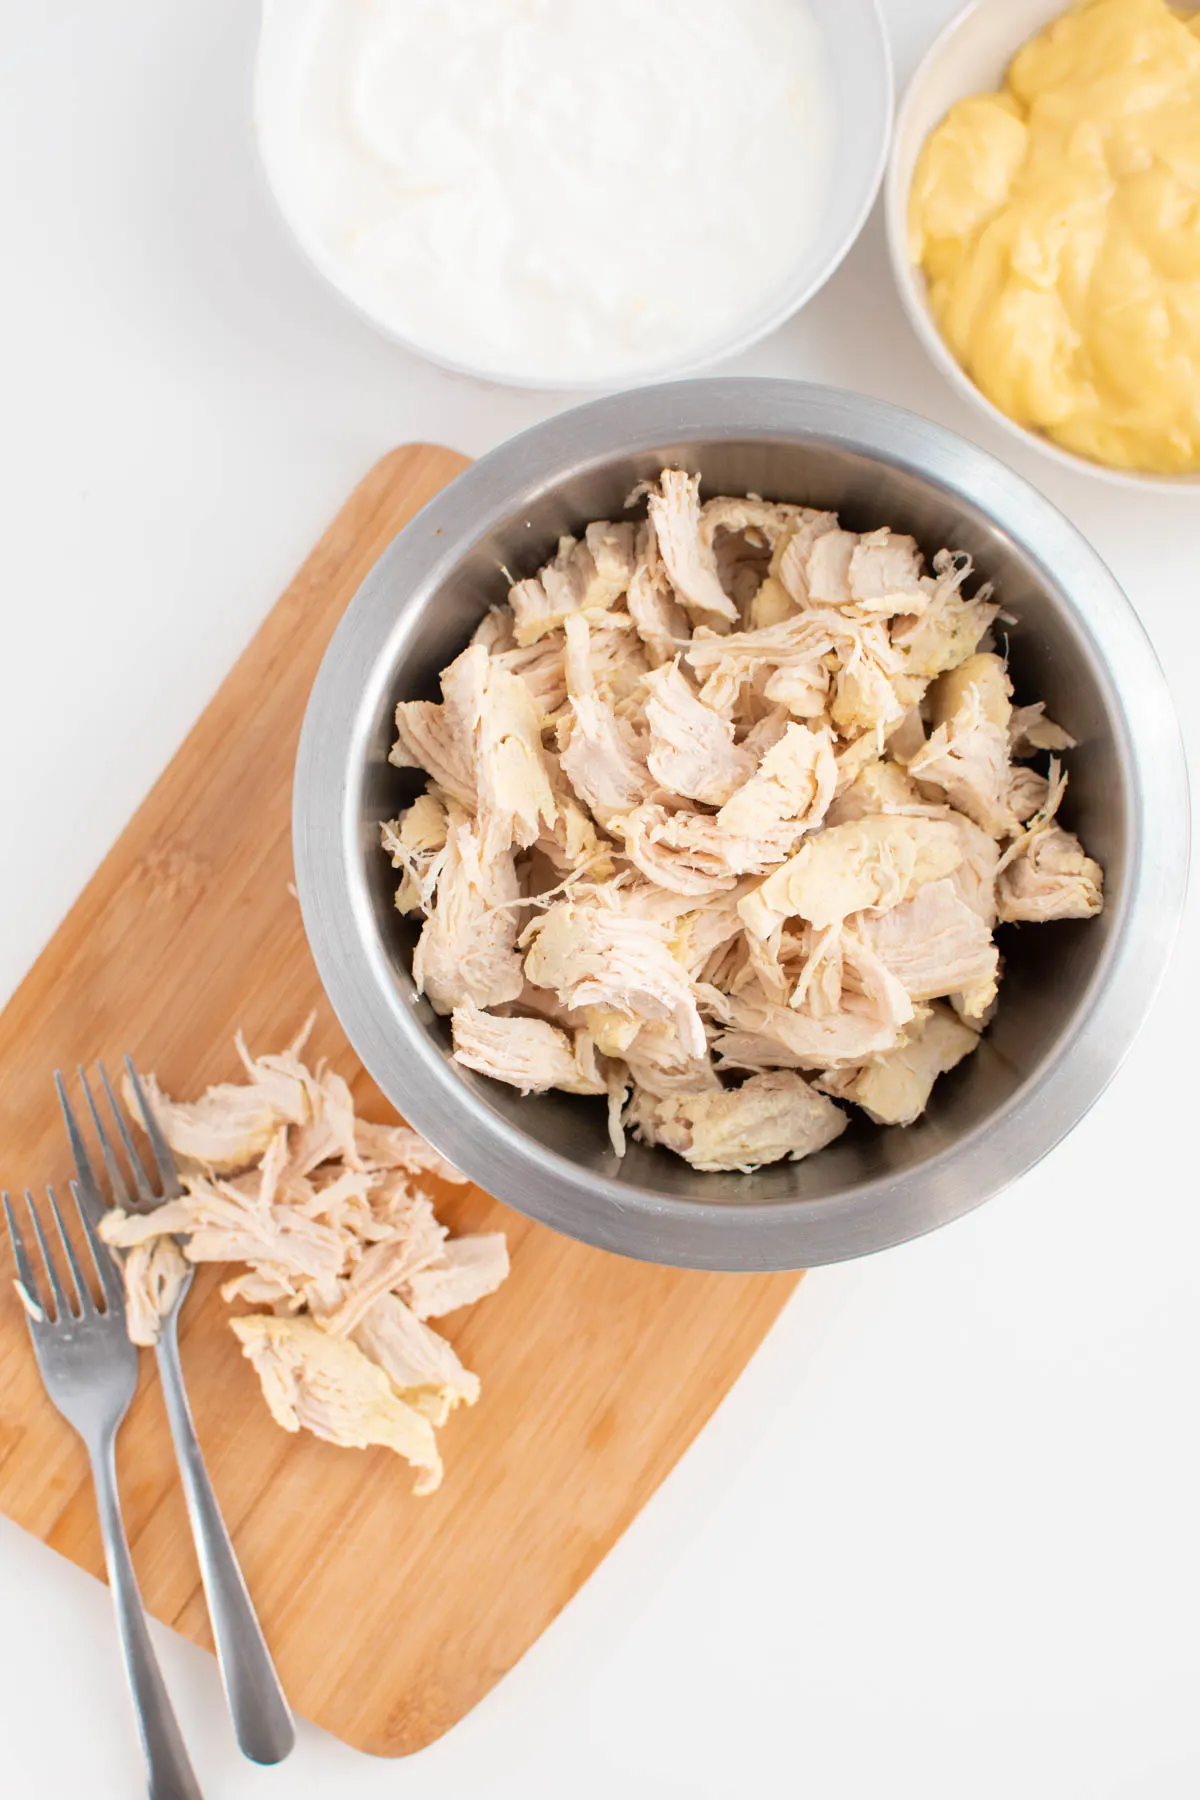 Shredded chicken in small bowl on top of wood cutting board next to bowls of ingredients.